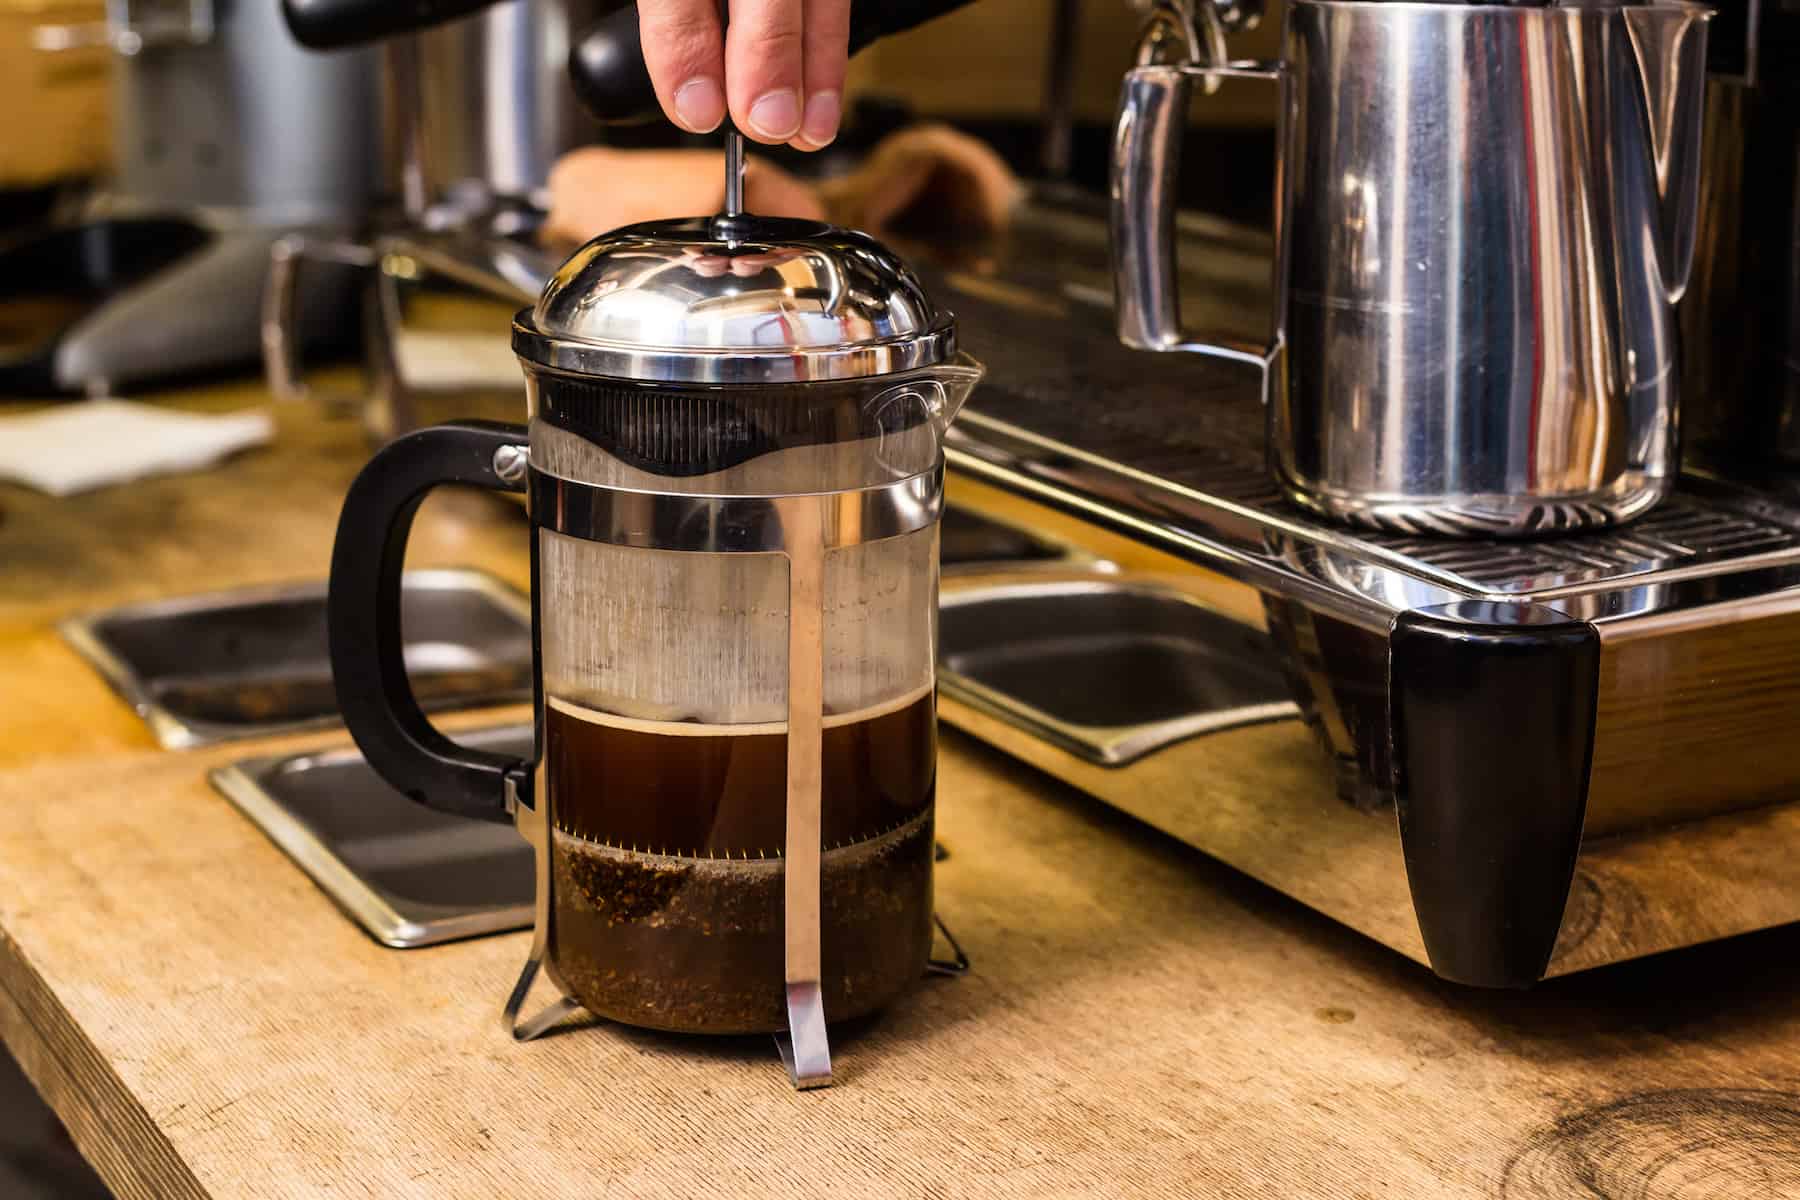 Pressing on a french press